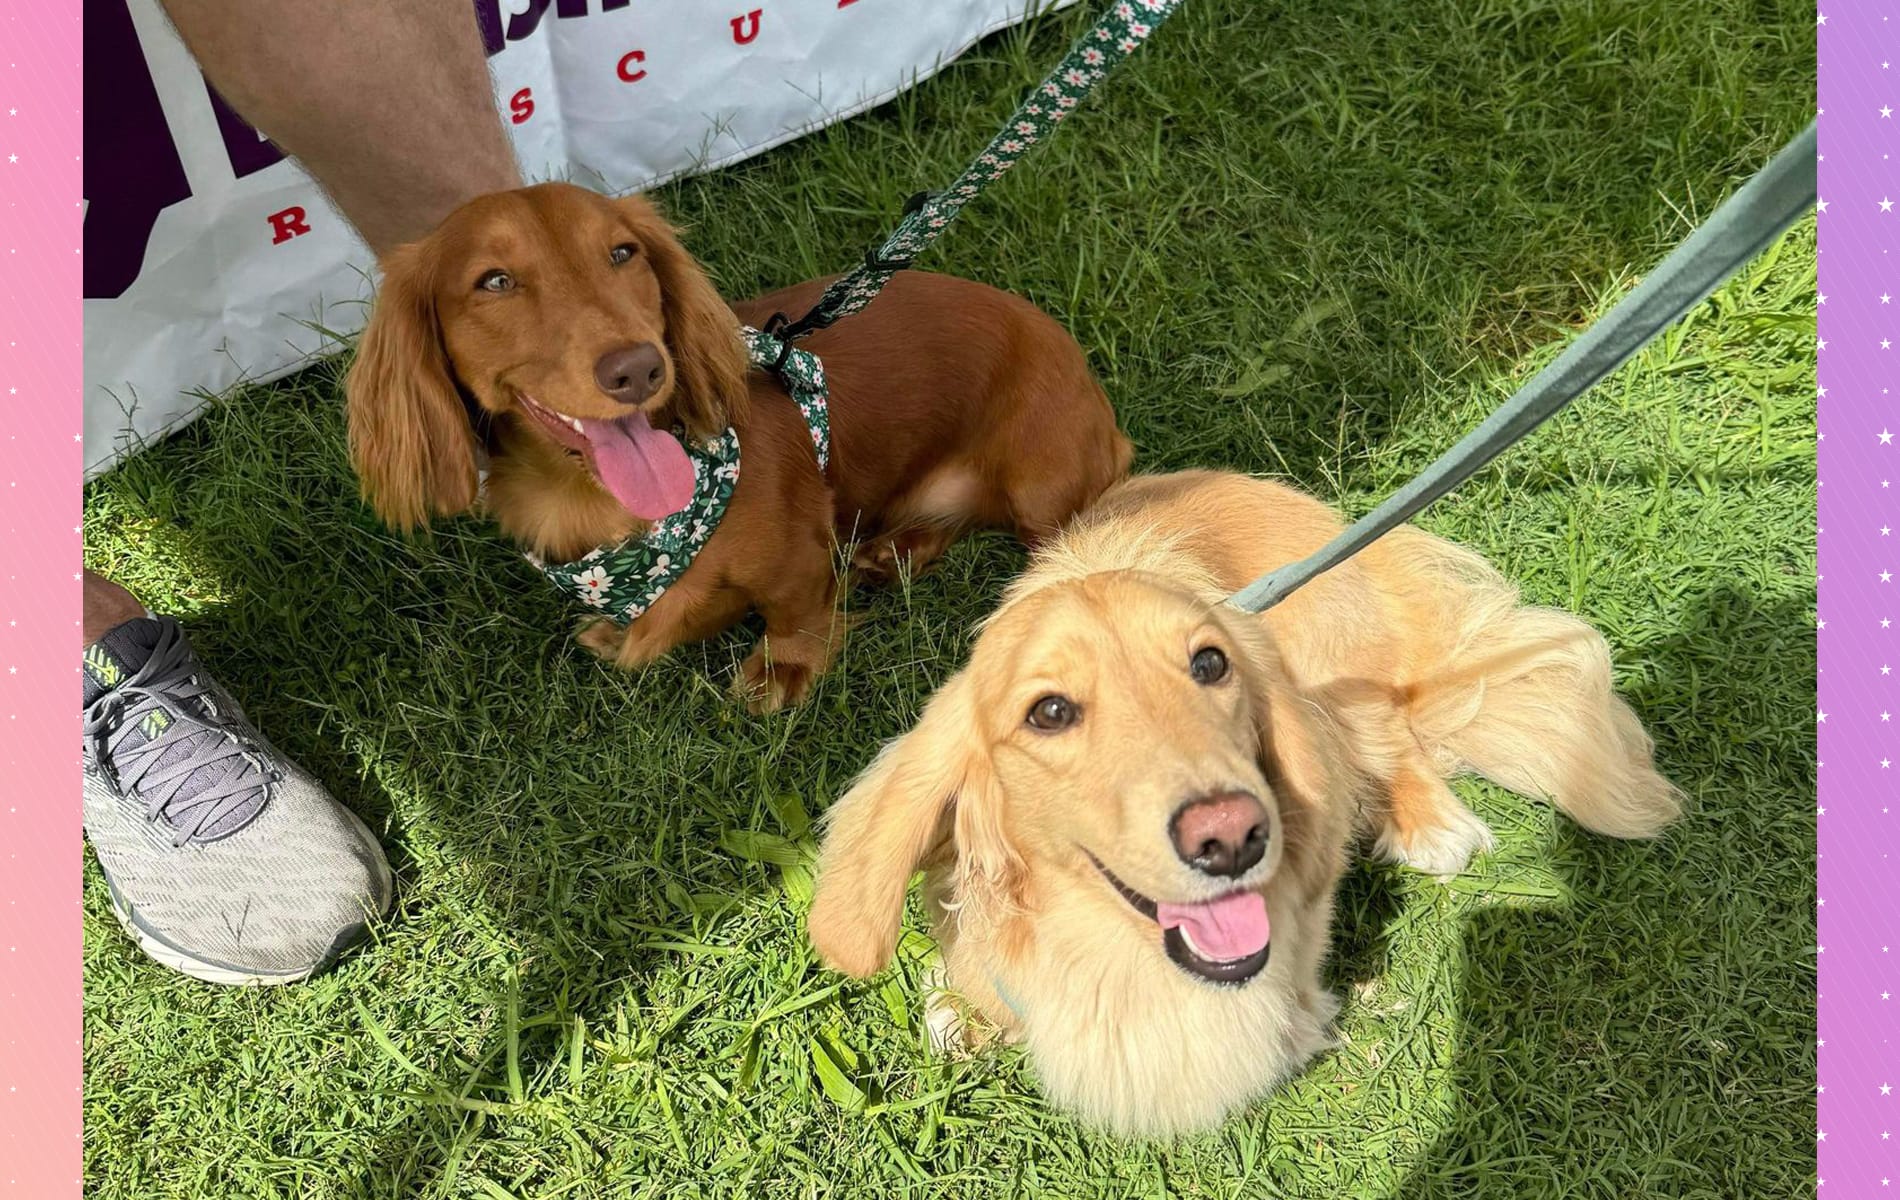 Dachshunds Take Over the Park!